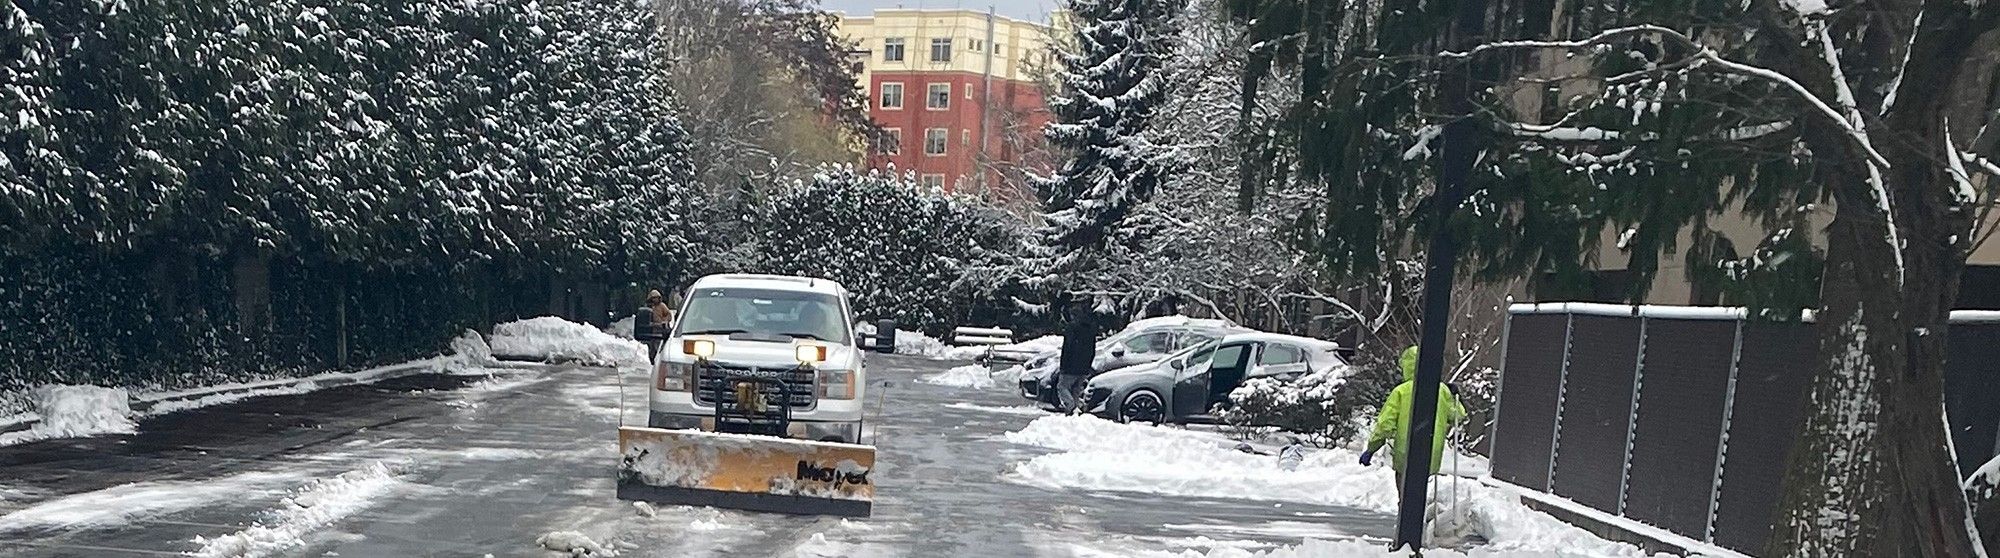 Downtown Kent Washington in winter where an Alamo snow plow pickup truck clears the street of piled up snow. 